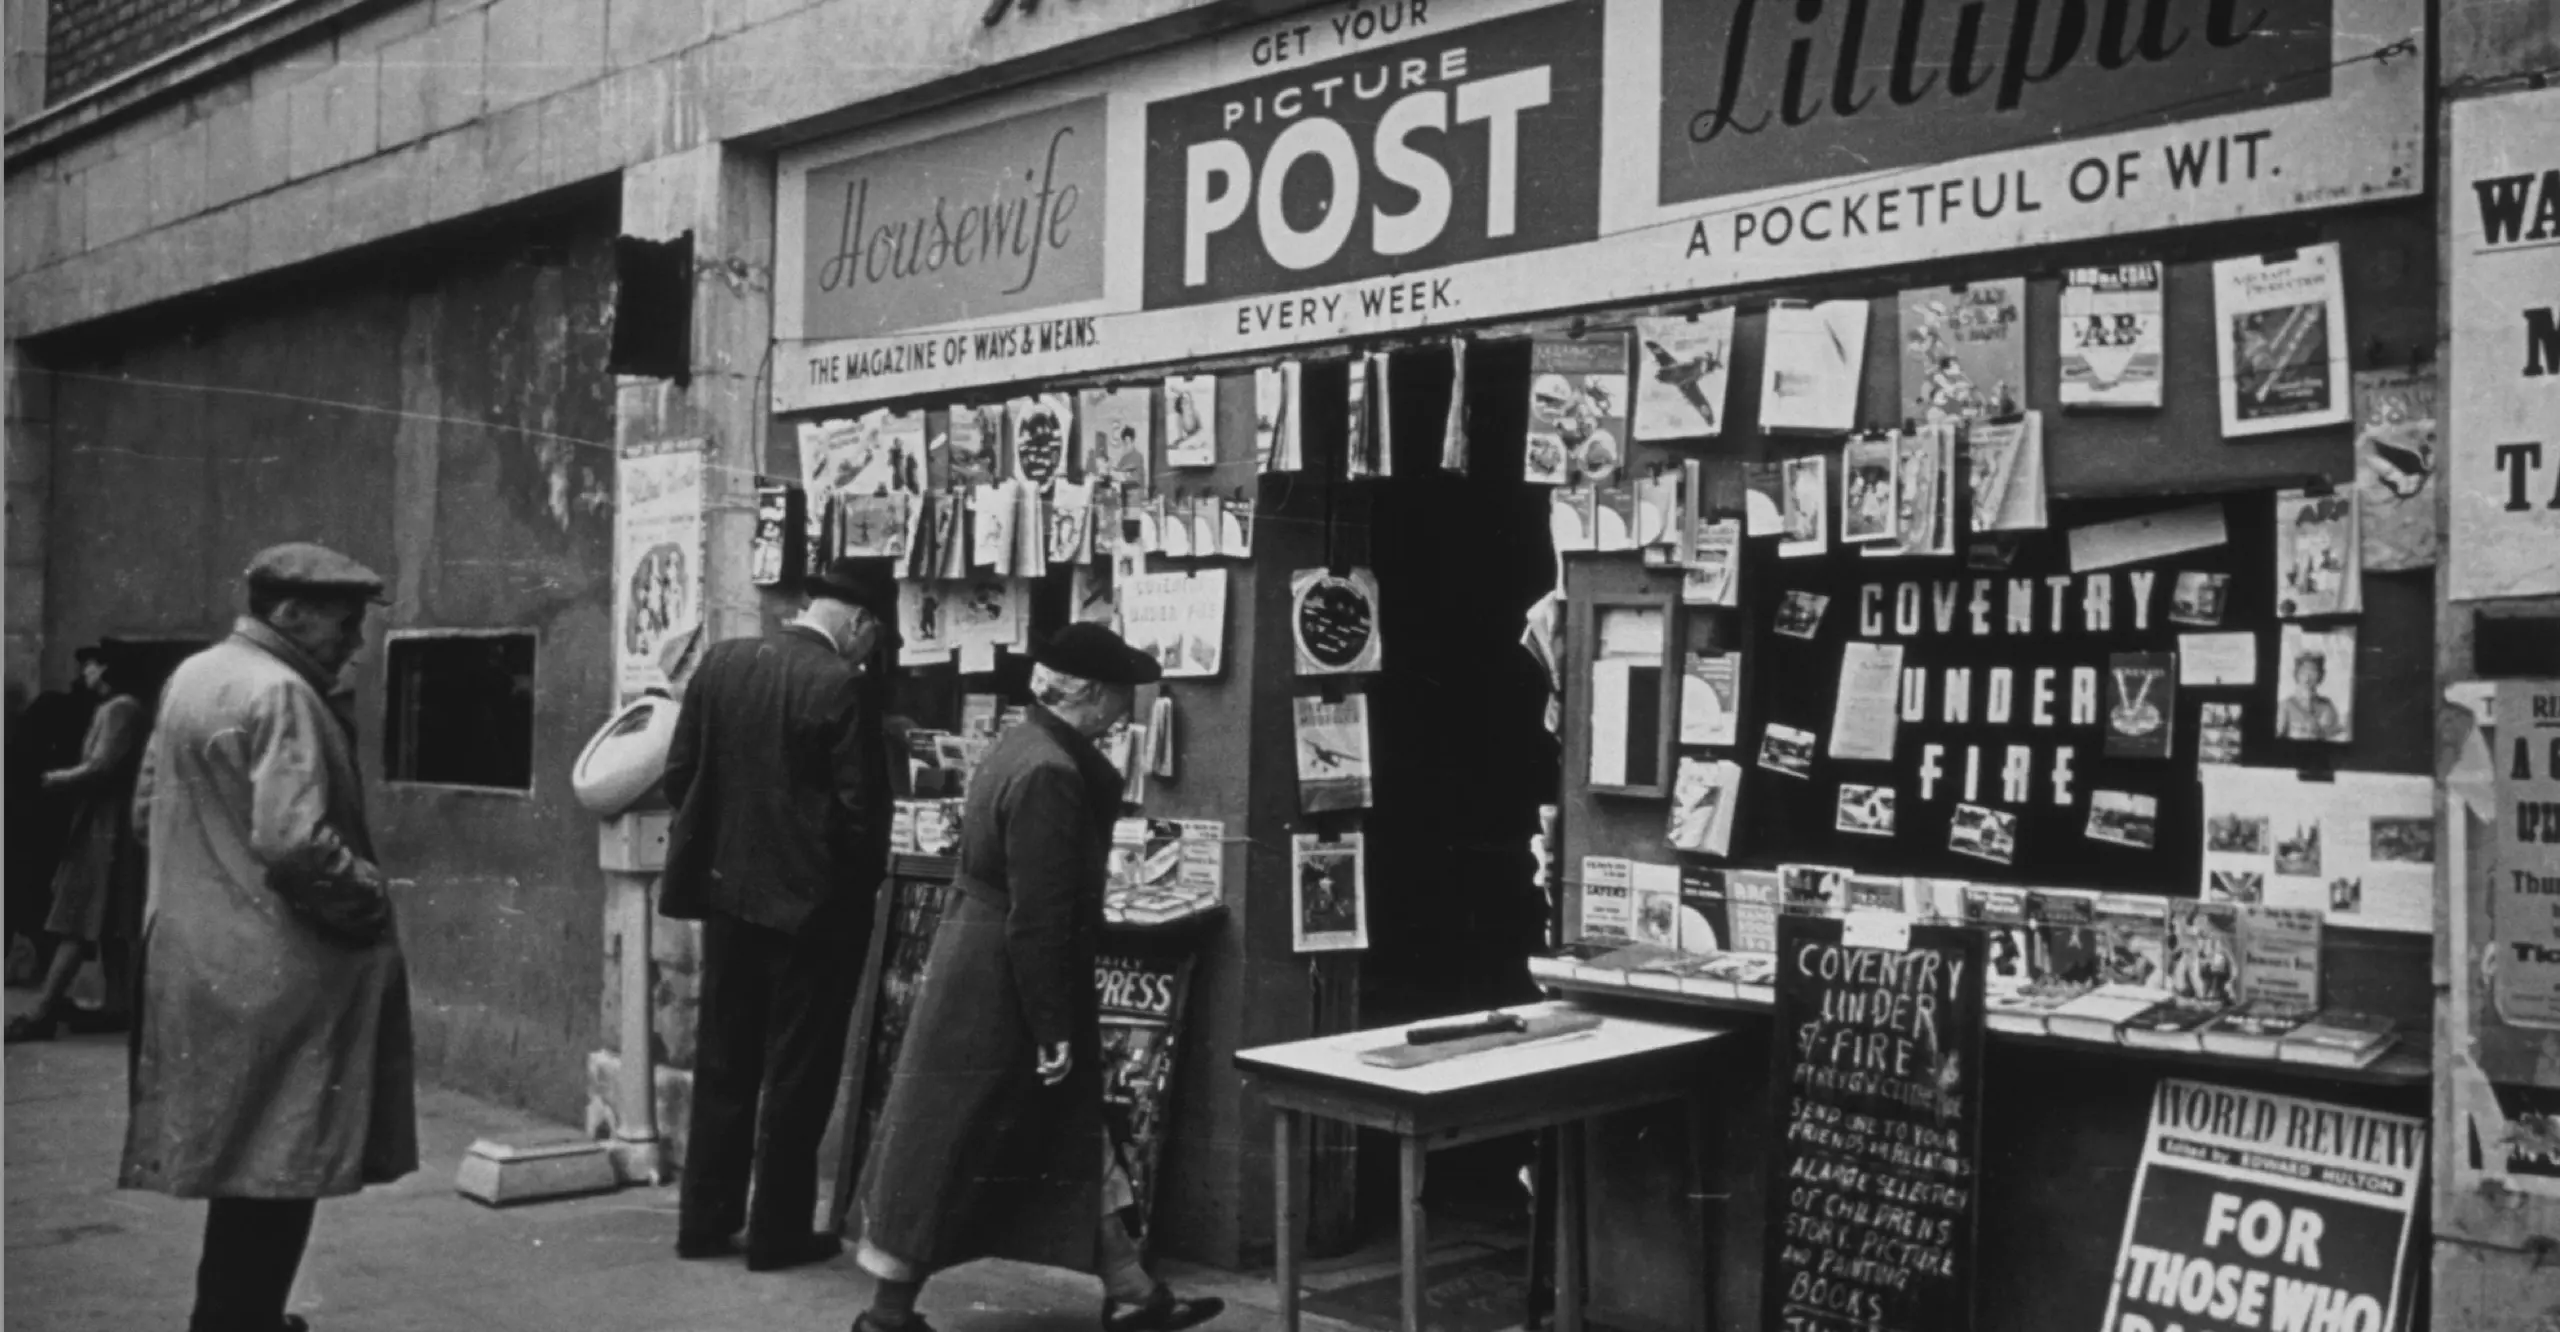 Black and white image showing a news stand with the words "Picture Post" and several figures standing outside